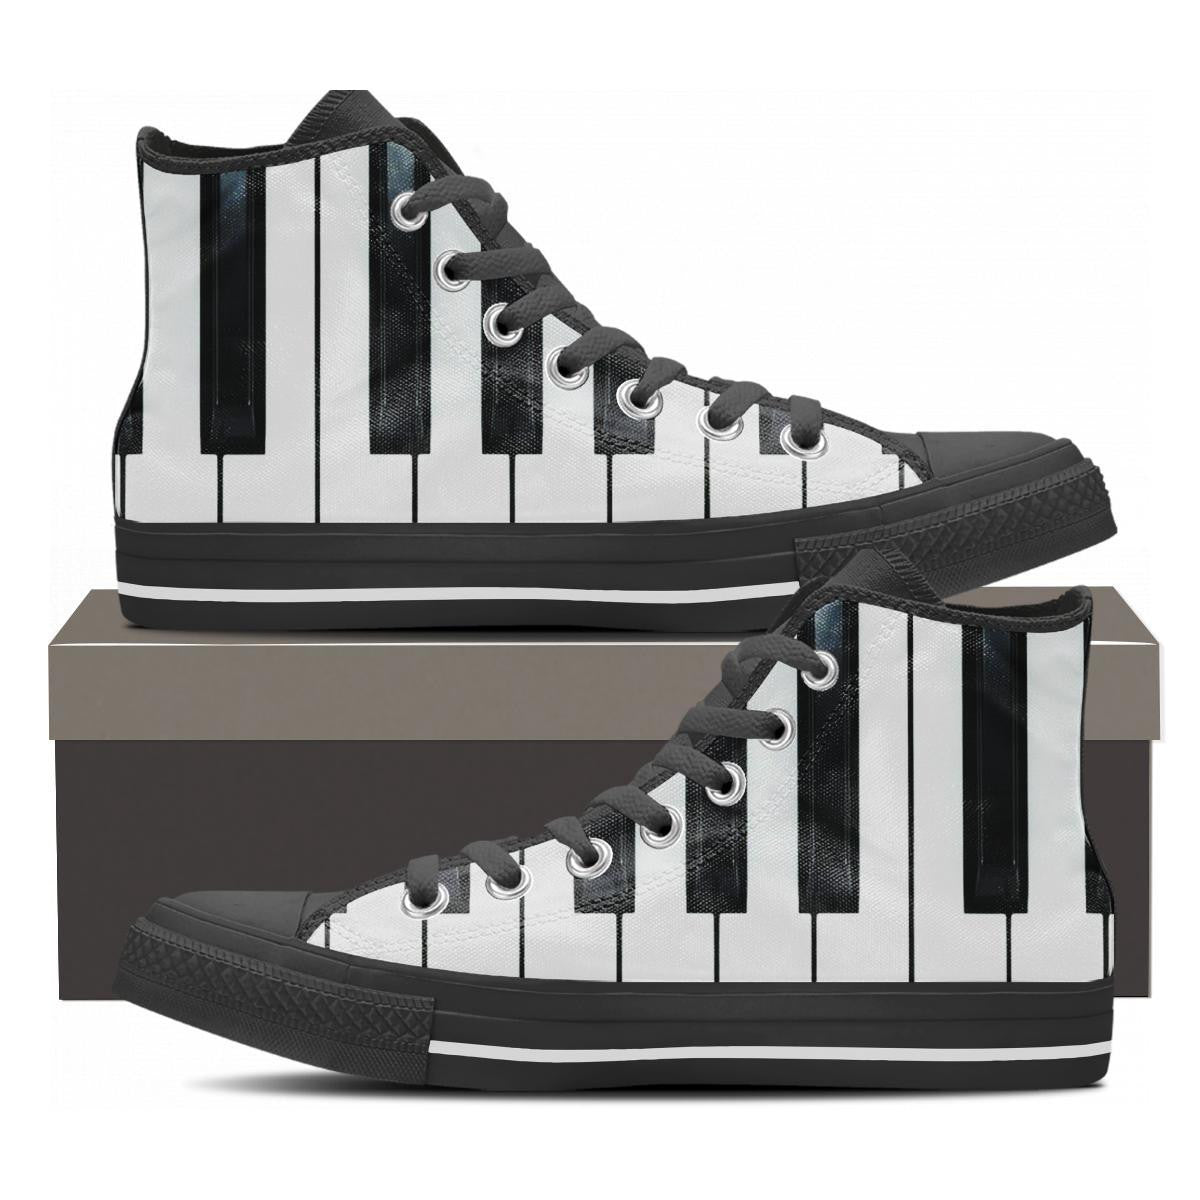 Piano High Tops - Cool Tees and Things